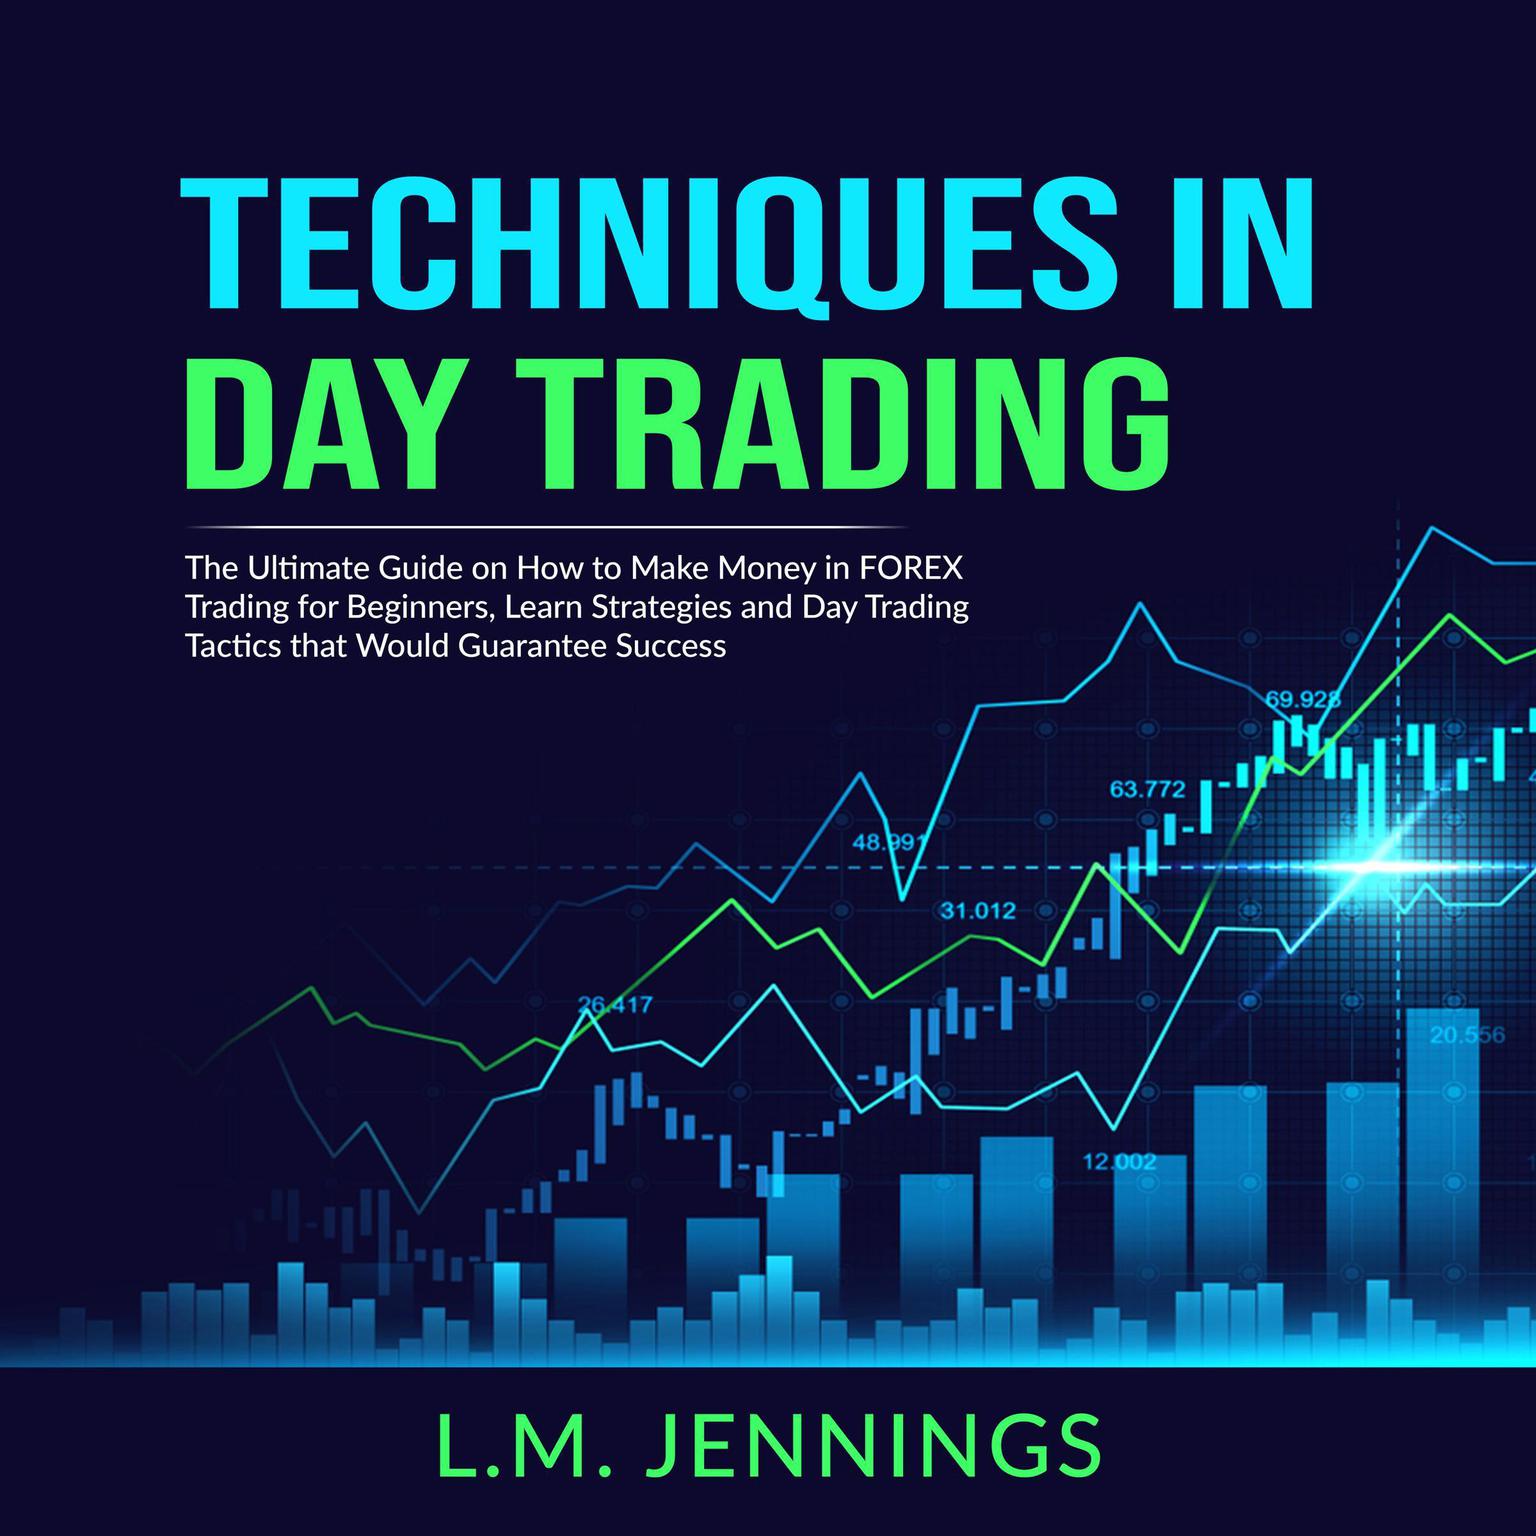 Techniques in Day Trading: The Ultimate Guide on How to Make Money in FOREX Trading for Beginners, Learn Strategies and Day Trading Tactics that would Guarantee Success Audiobook, by L.M. Jennings